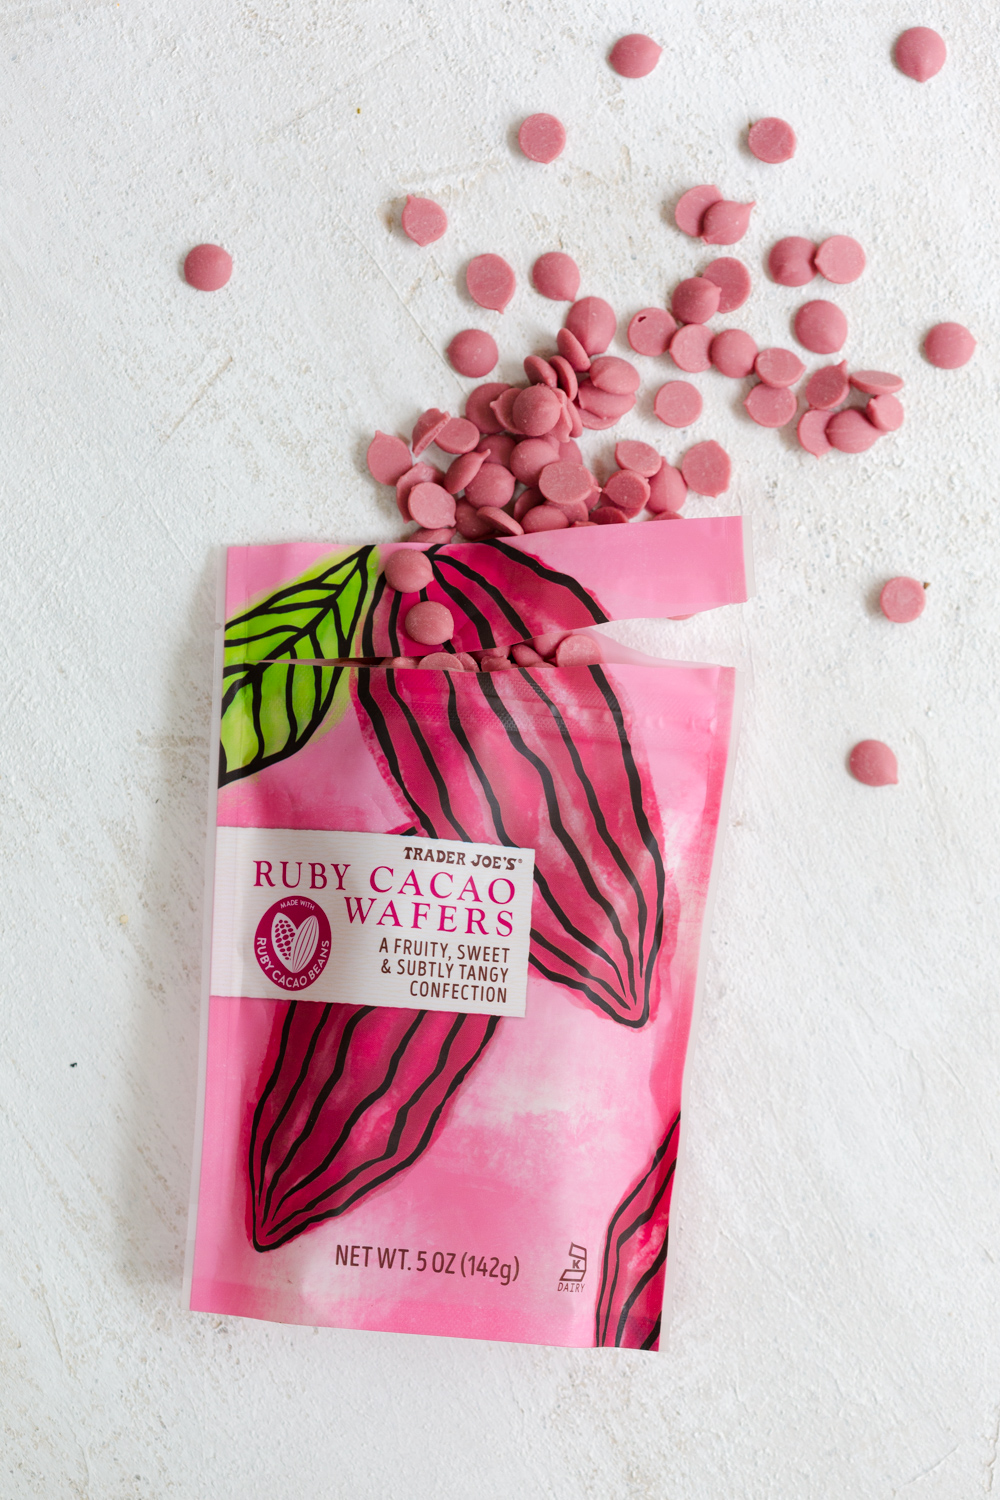 Ruby Cacao Wafers from Trader Joe's